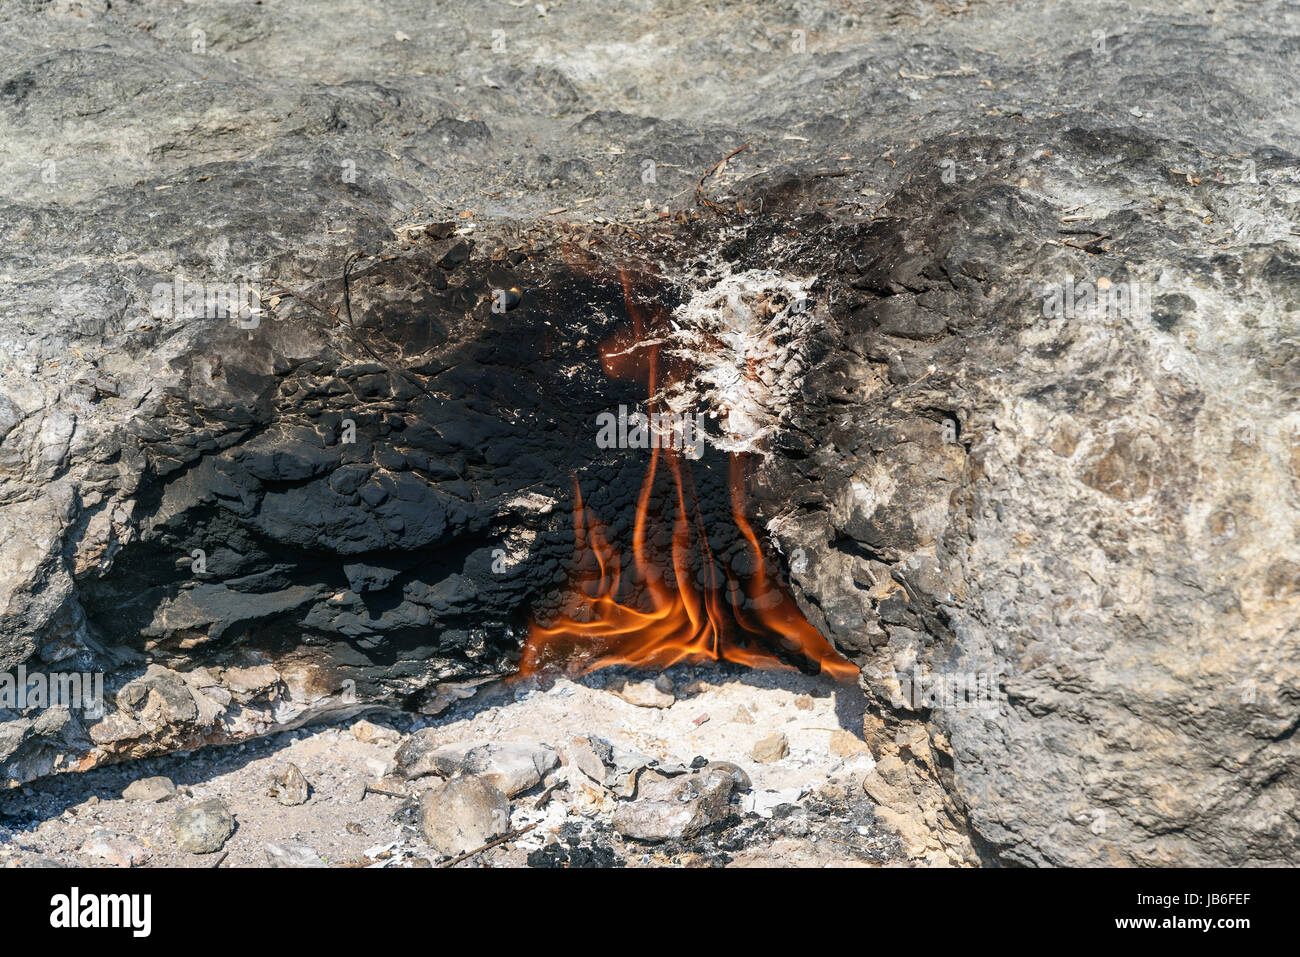 Flames of Chimaera Mount from the ground. Fire from natural gas in the rocks. Turkey Stock Photo